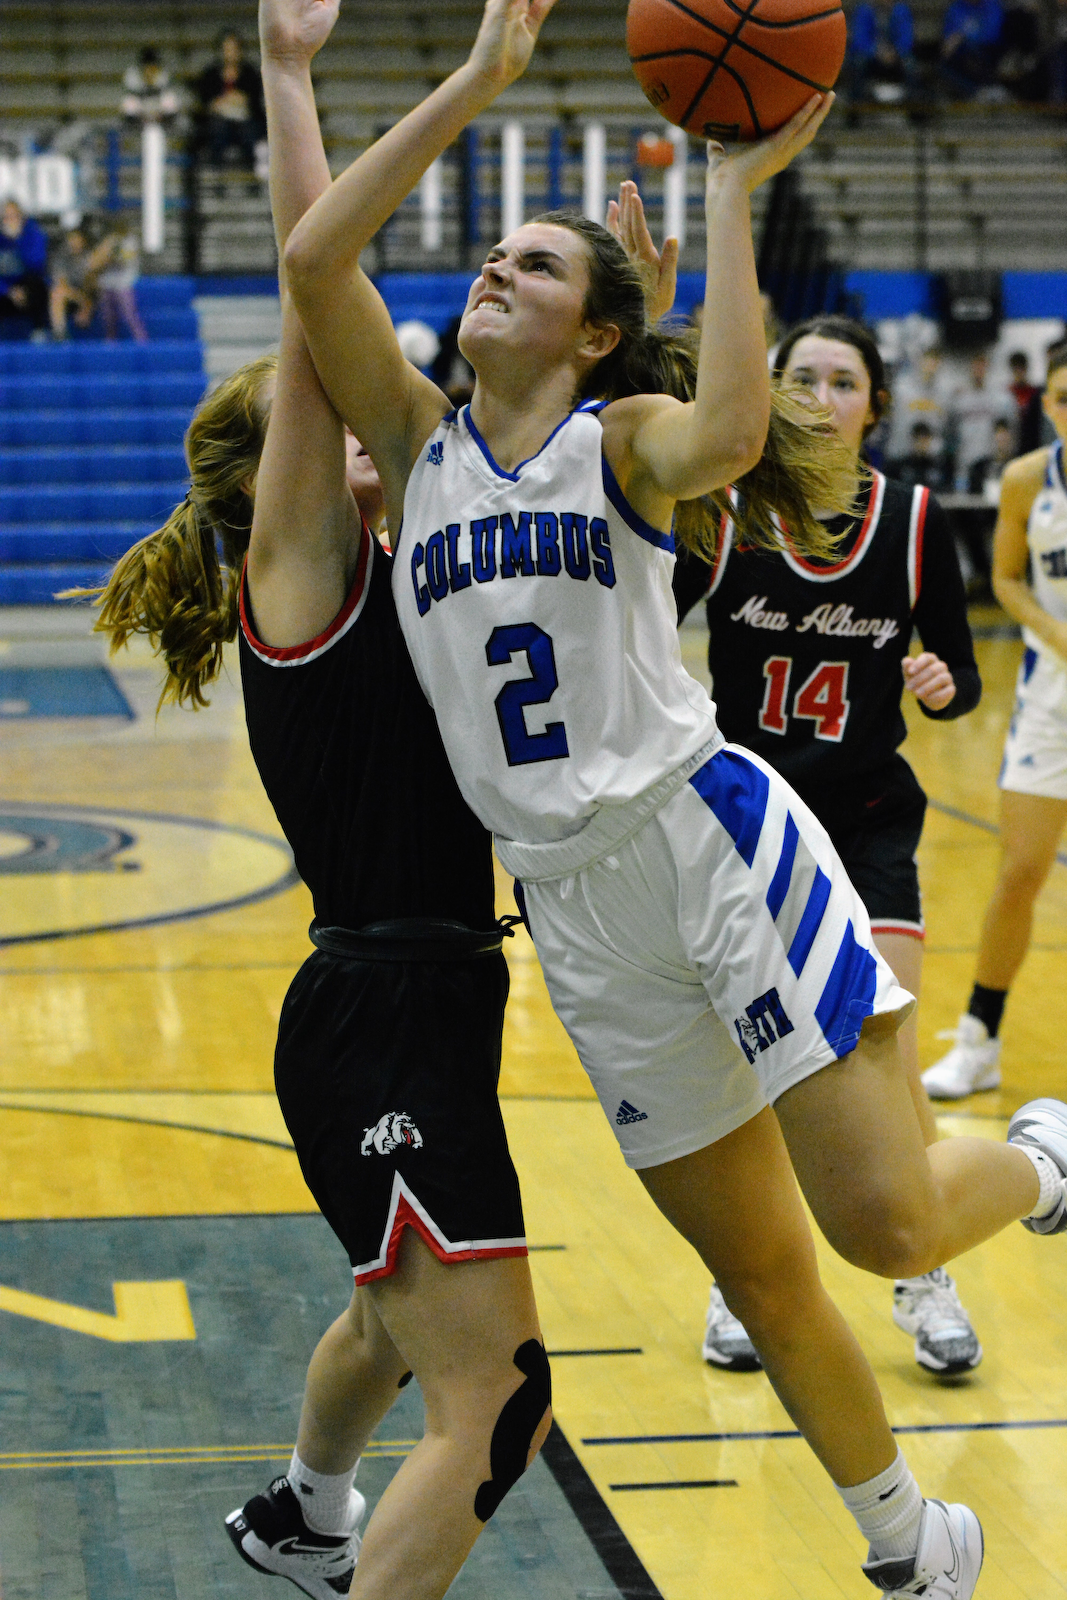 Girls basketball wins third straight in rout over New Albany cover photo